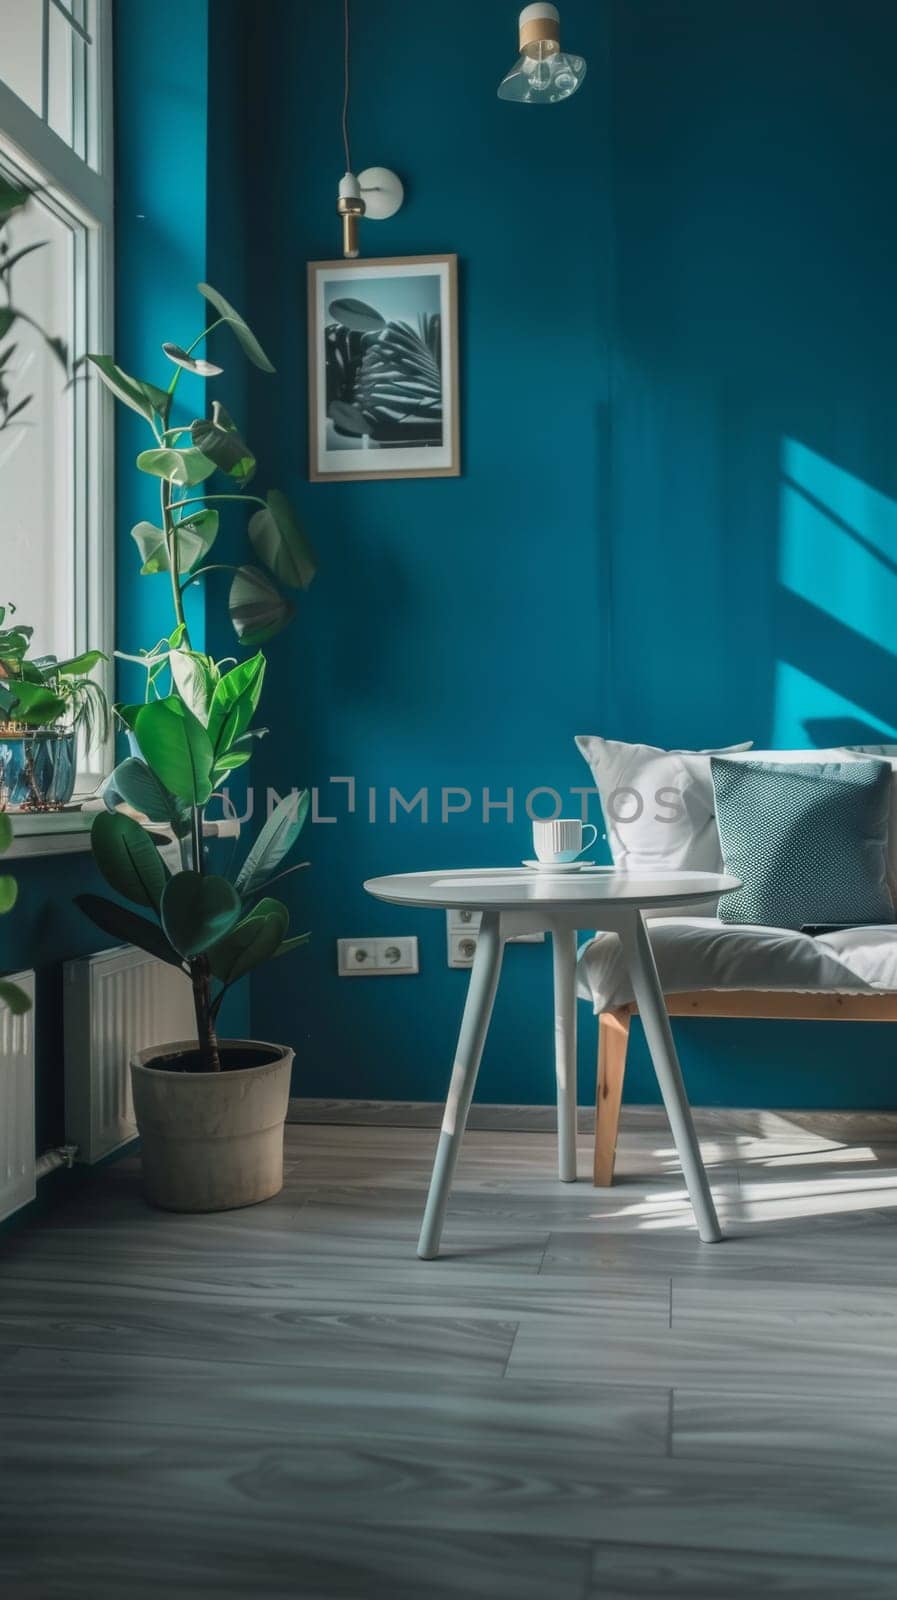 A cozy corner bathed in sunlight with a subtle blue wall, adding warmth to the minimal setup